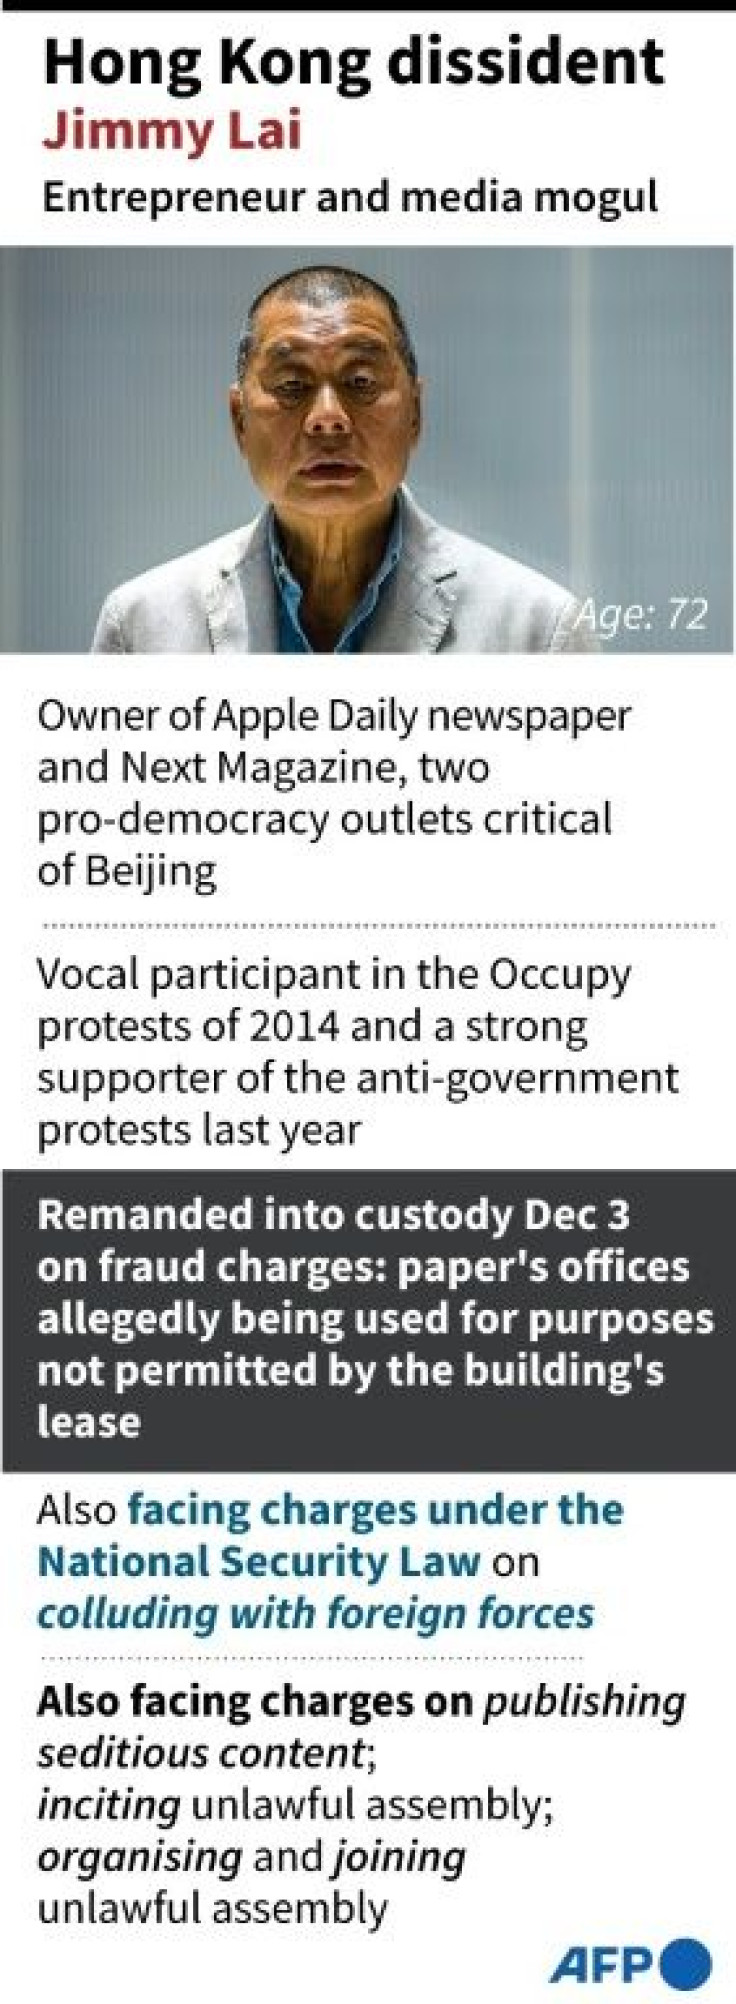 Factfile on Hong Kong newspaper owner and pro-democracy activist Jimmy Lai.